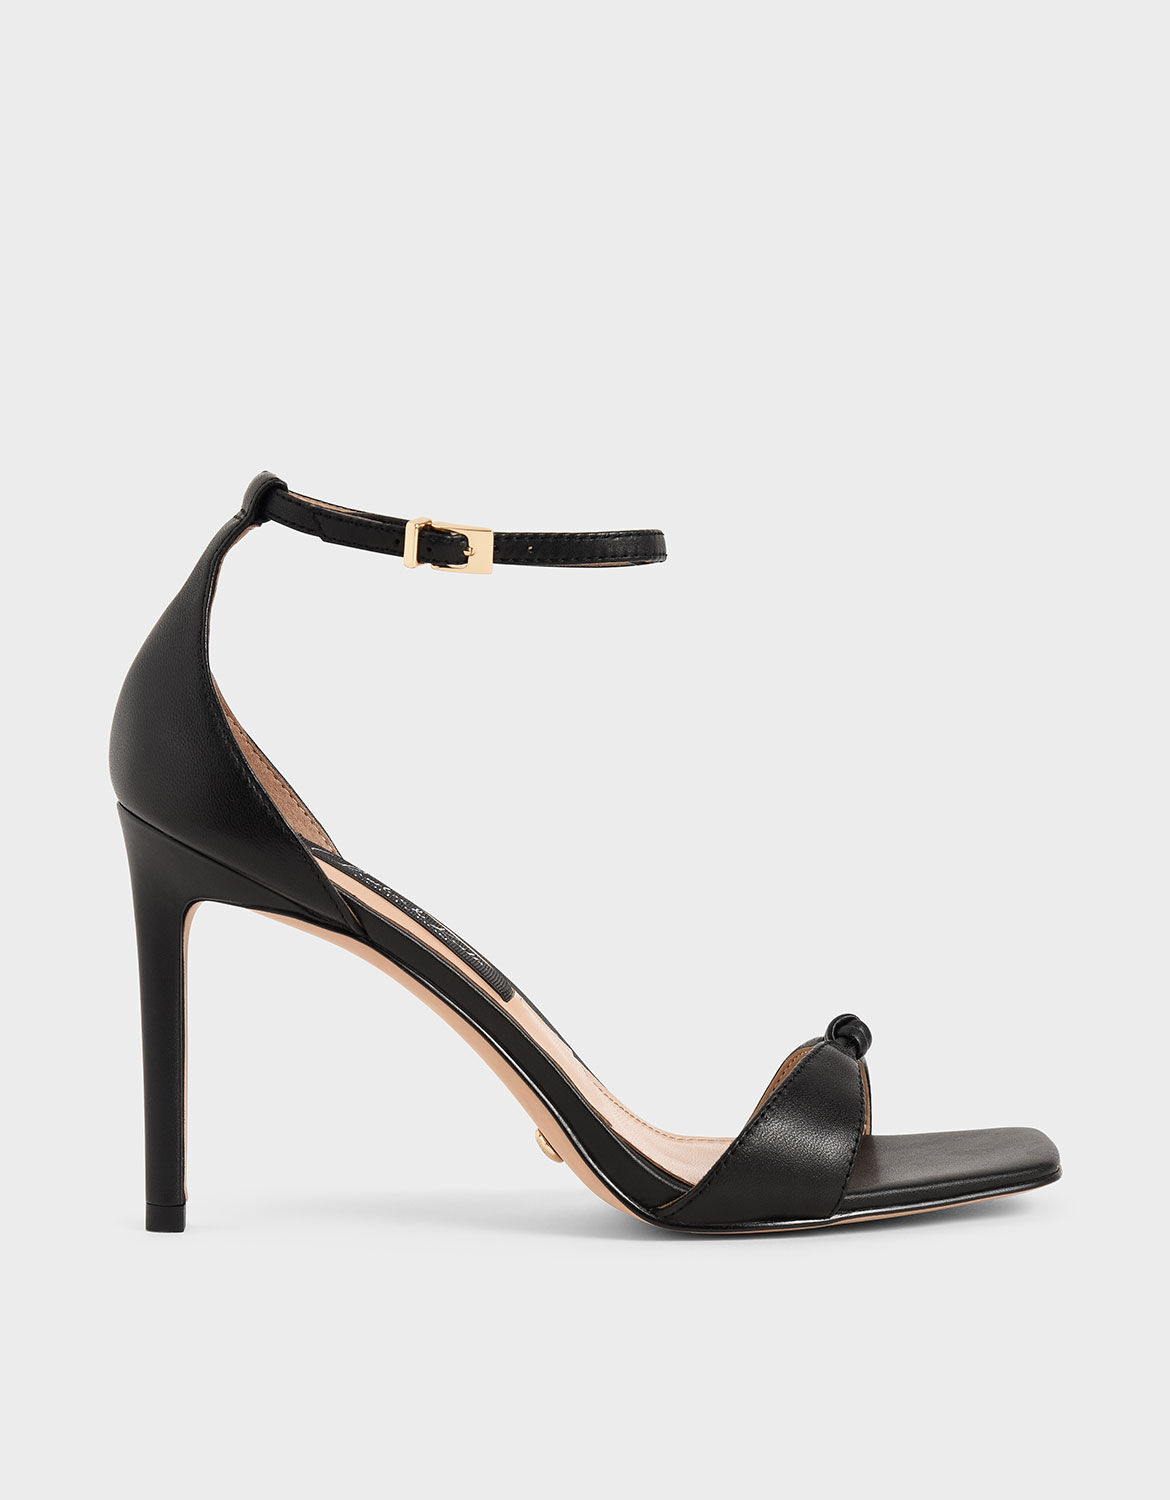 Shop Women's Sandals | Exclusive Styles | CHARLES & KEITH CA